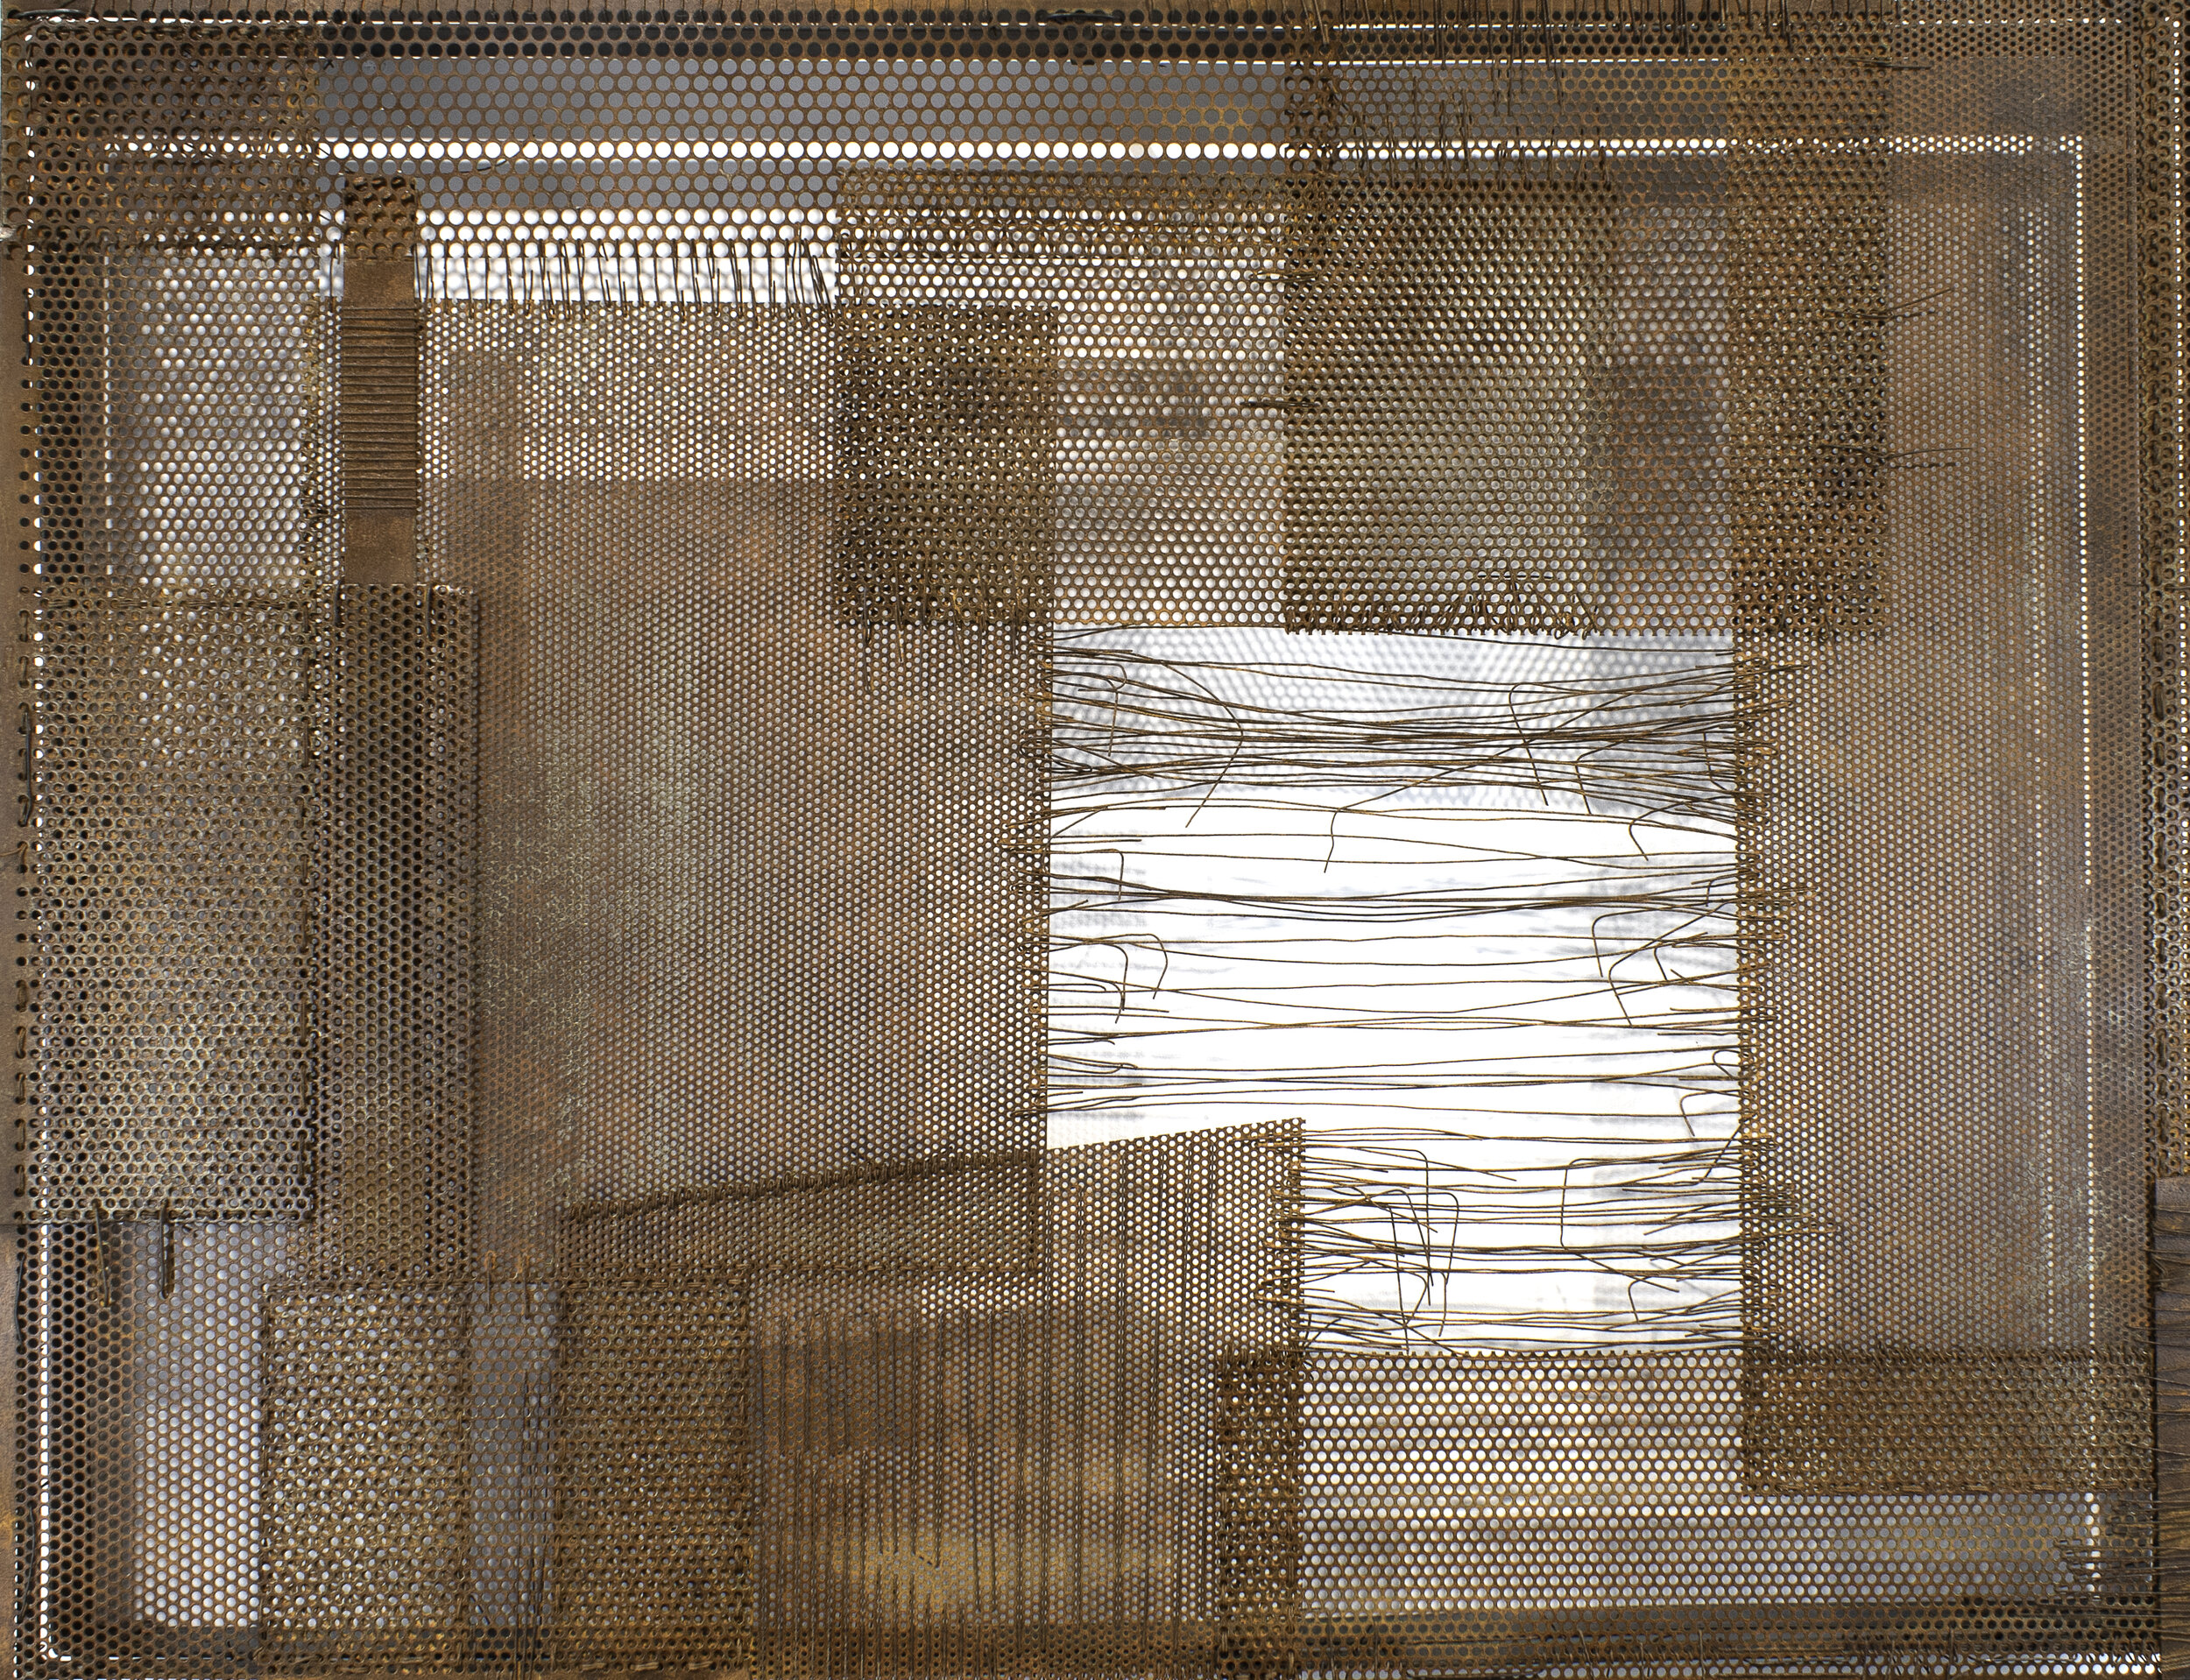 Verónica Vázquez, Weaves, 2014, Metal plates sewn with thread and wire, 90 x 117 x 10 cm